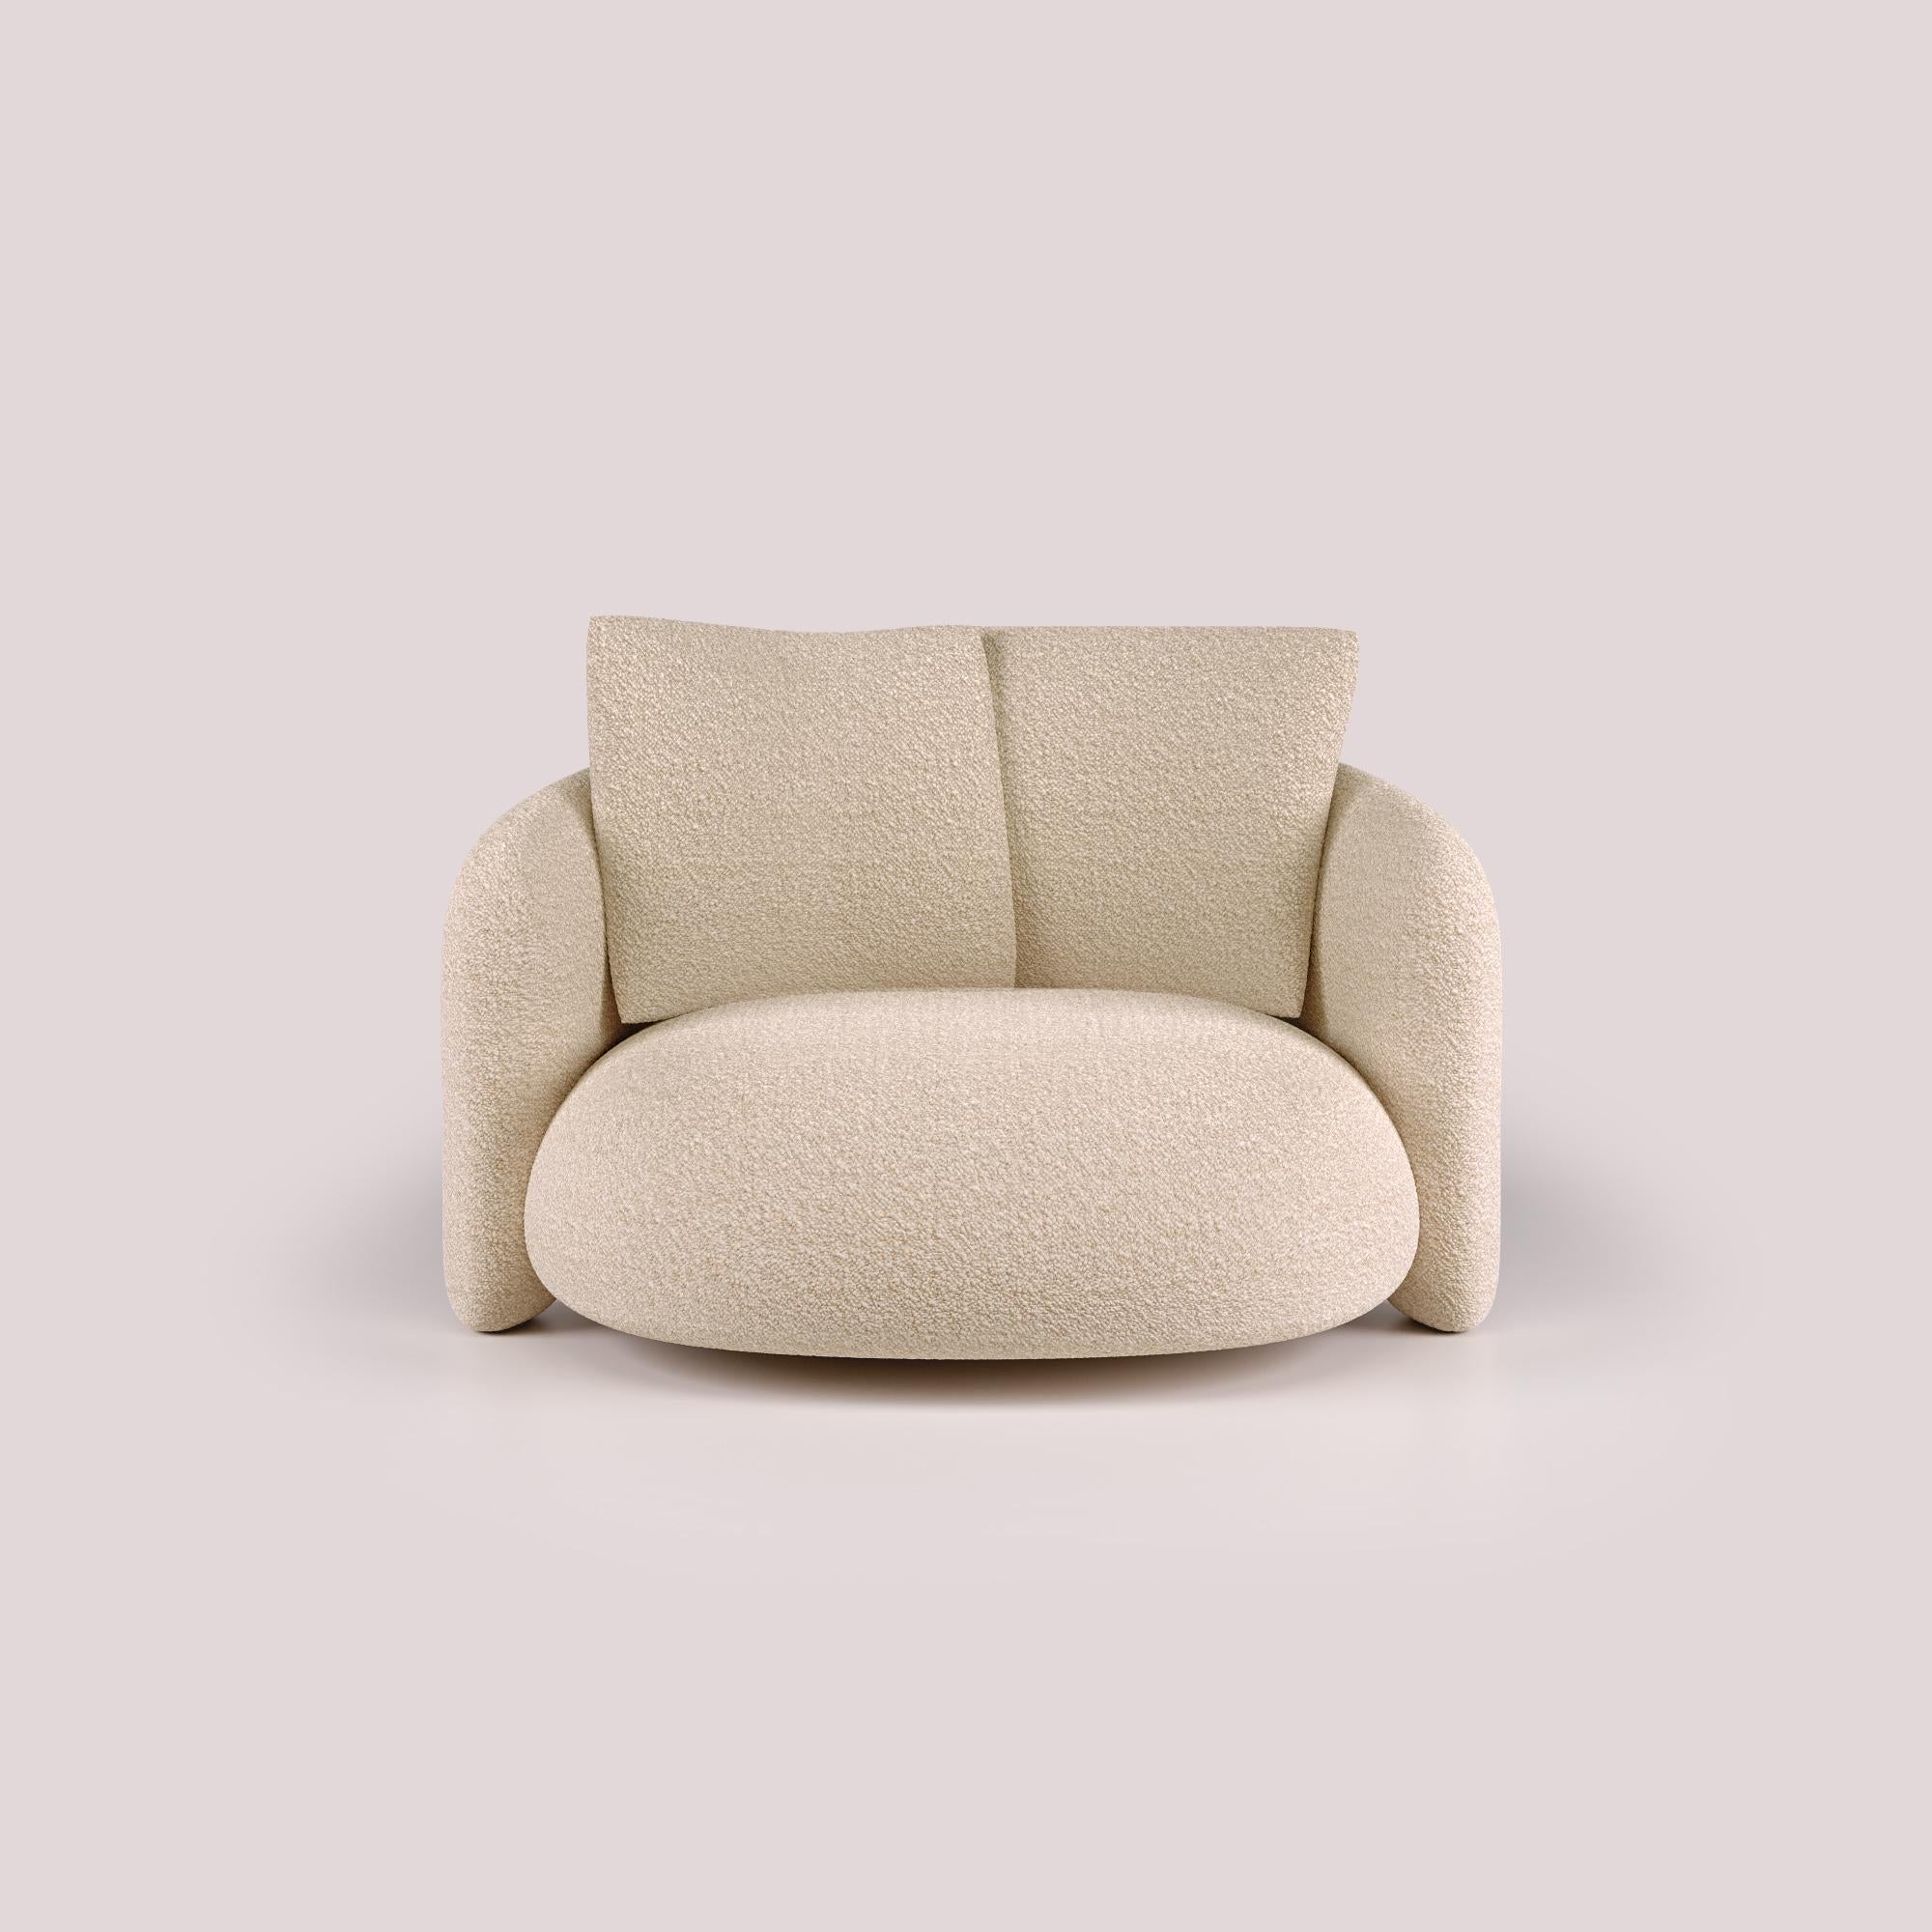 Expressing modern design excellence, the Bold Love Seat is a testament to the artistry of luxury living. Decades of design expertise are showcased through an elegant and refined aesthetic. Its inviting design features a clean, sleek silhouette that